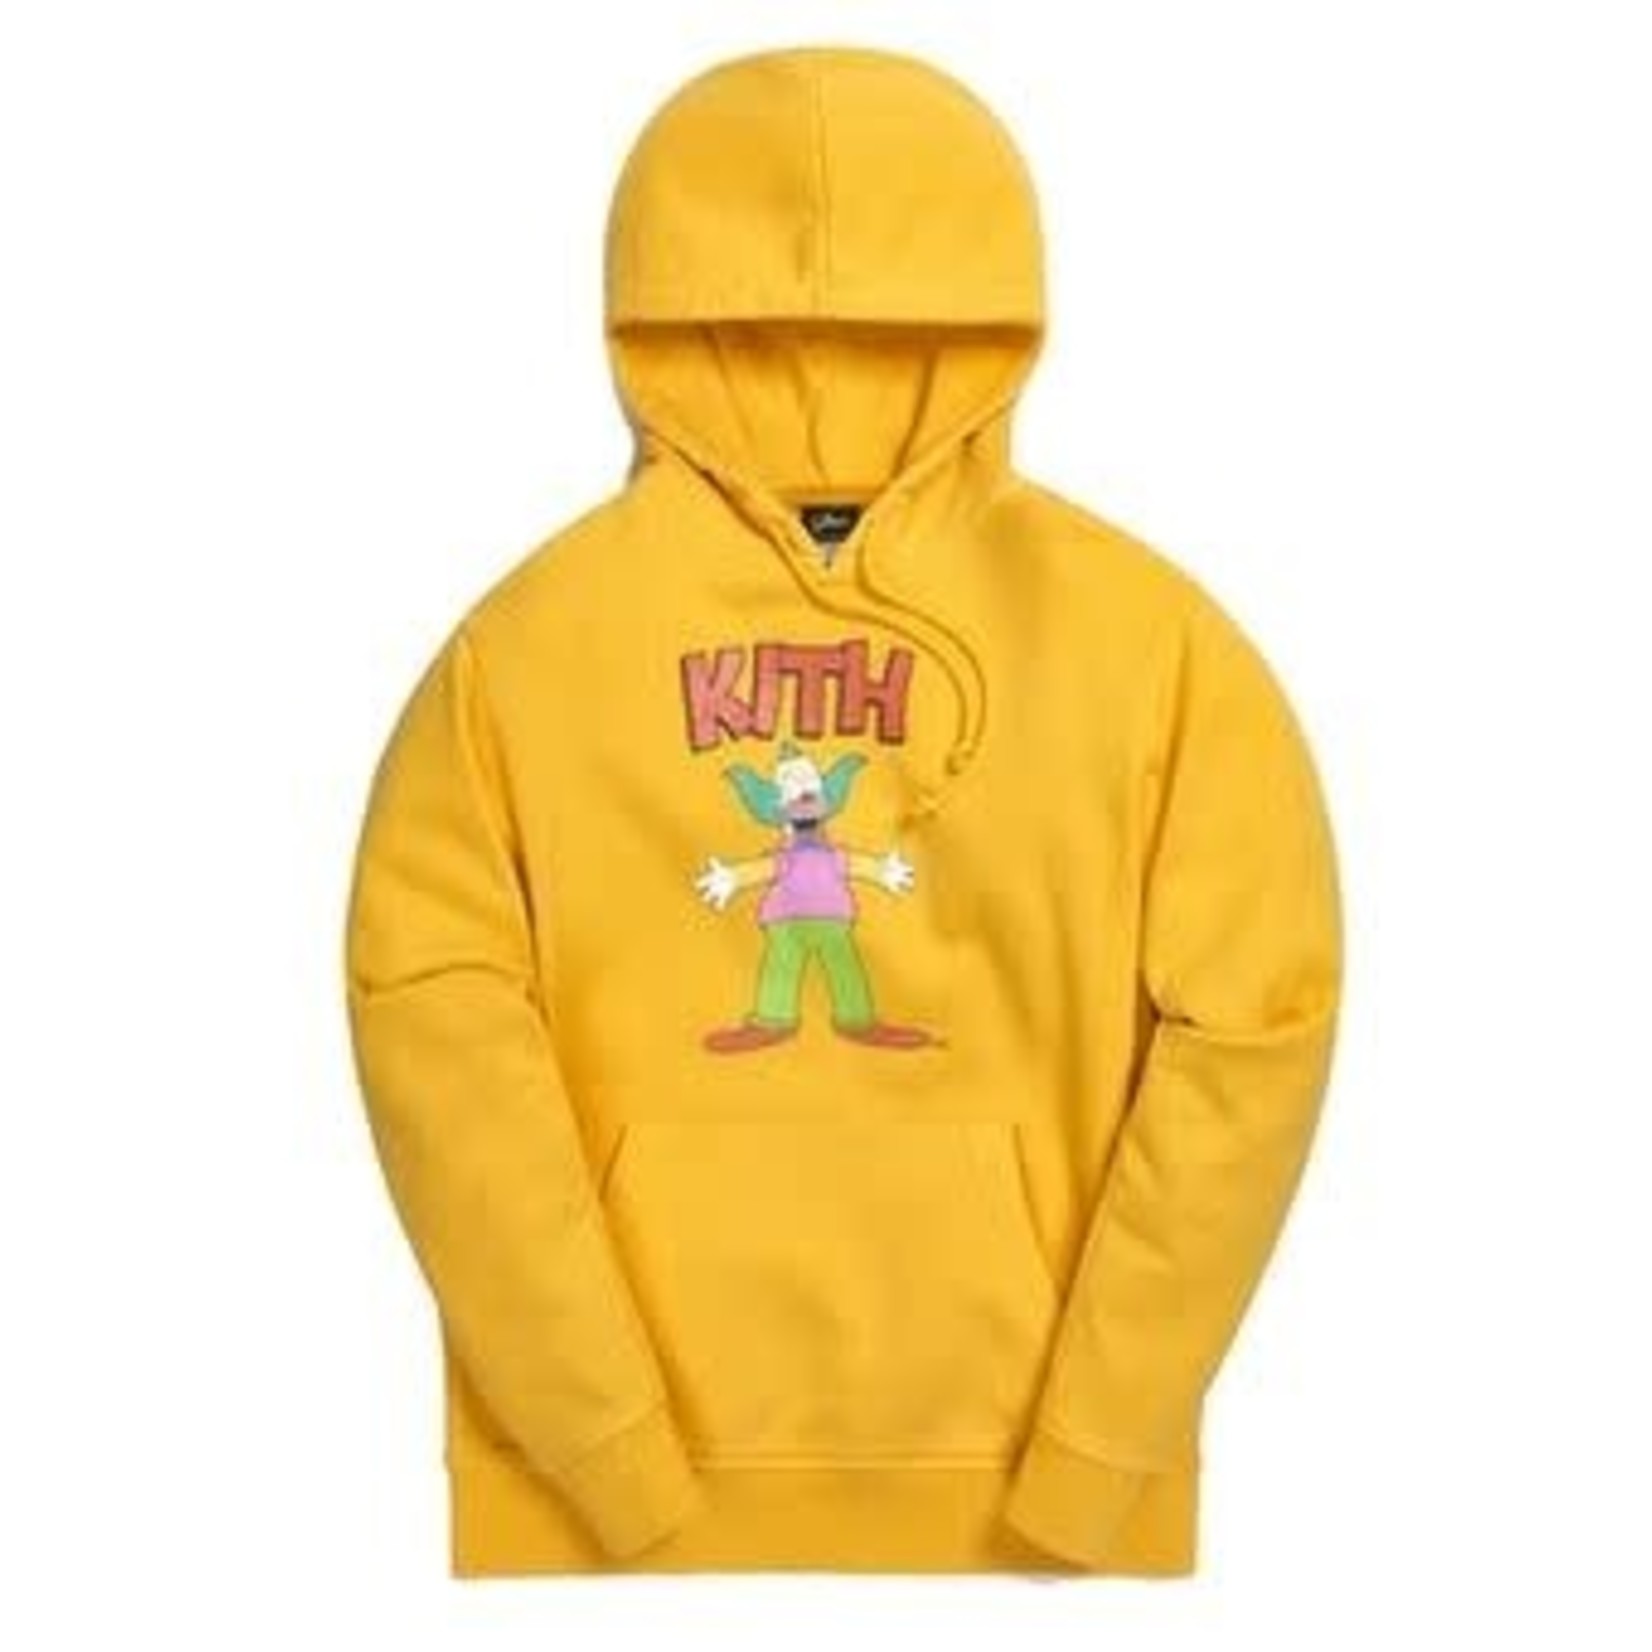 Kith Kith X The Simpsons Krusty Hoodie Yellow Size L, DS BRAND NEW